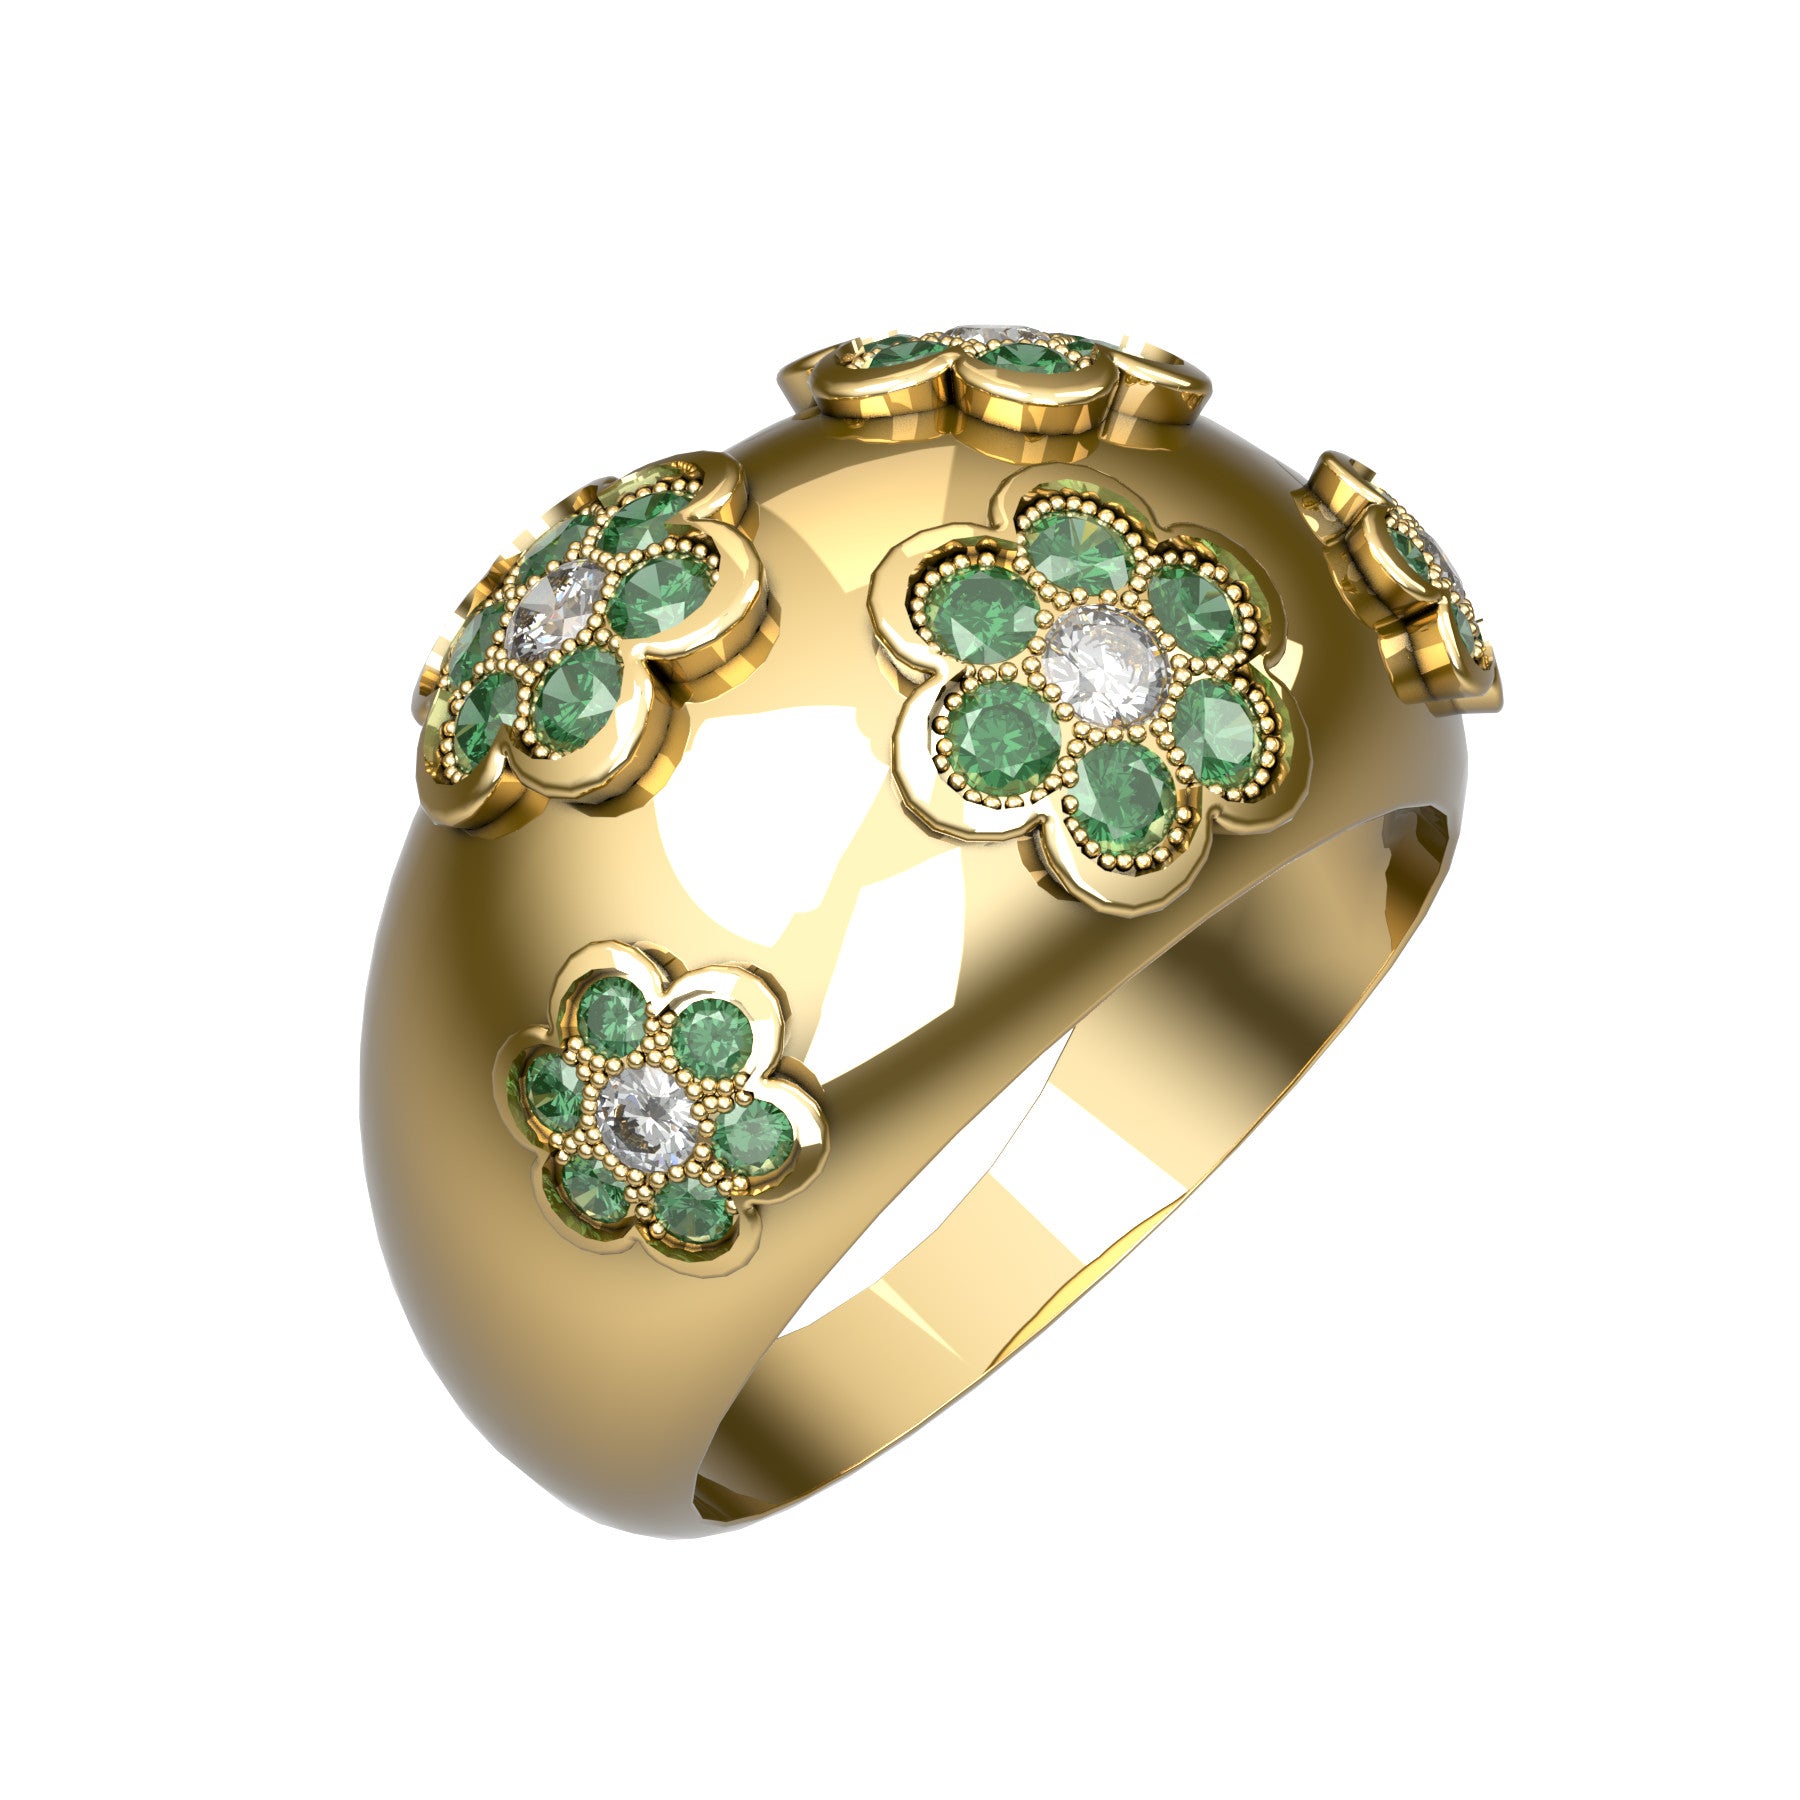 Blooming band ring, natural round diamonds, natural round emeralds, 18 k yellow gold, weight about 7,00 g (0.25 oz), width 12 mm max